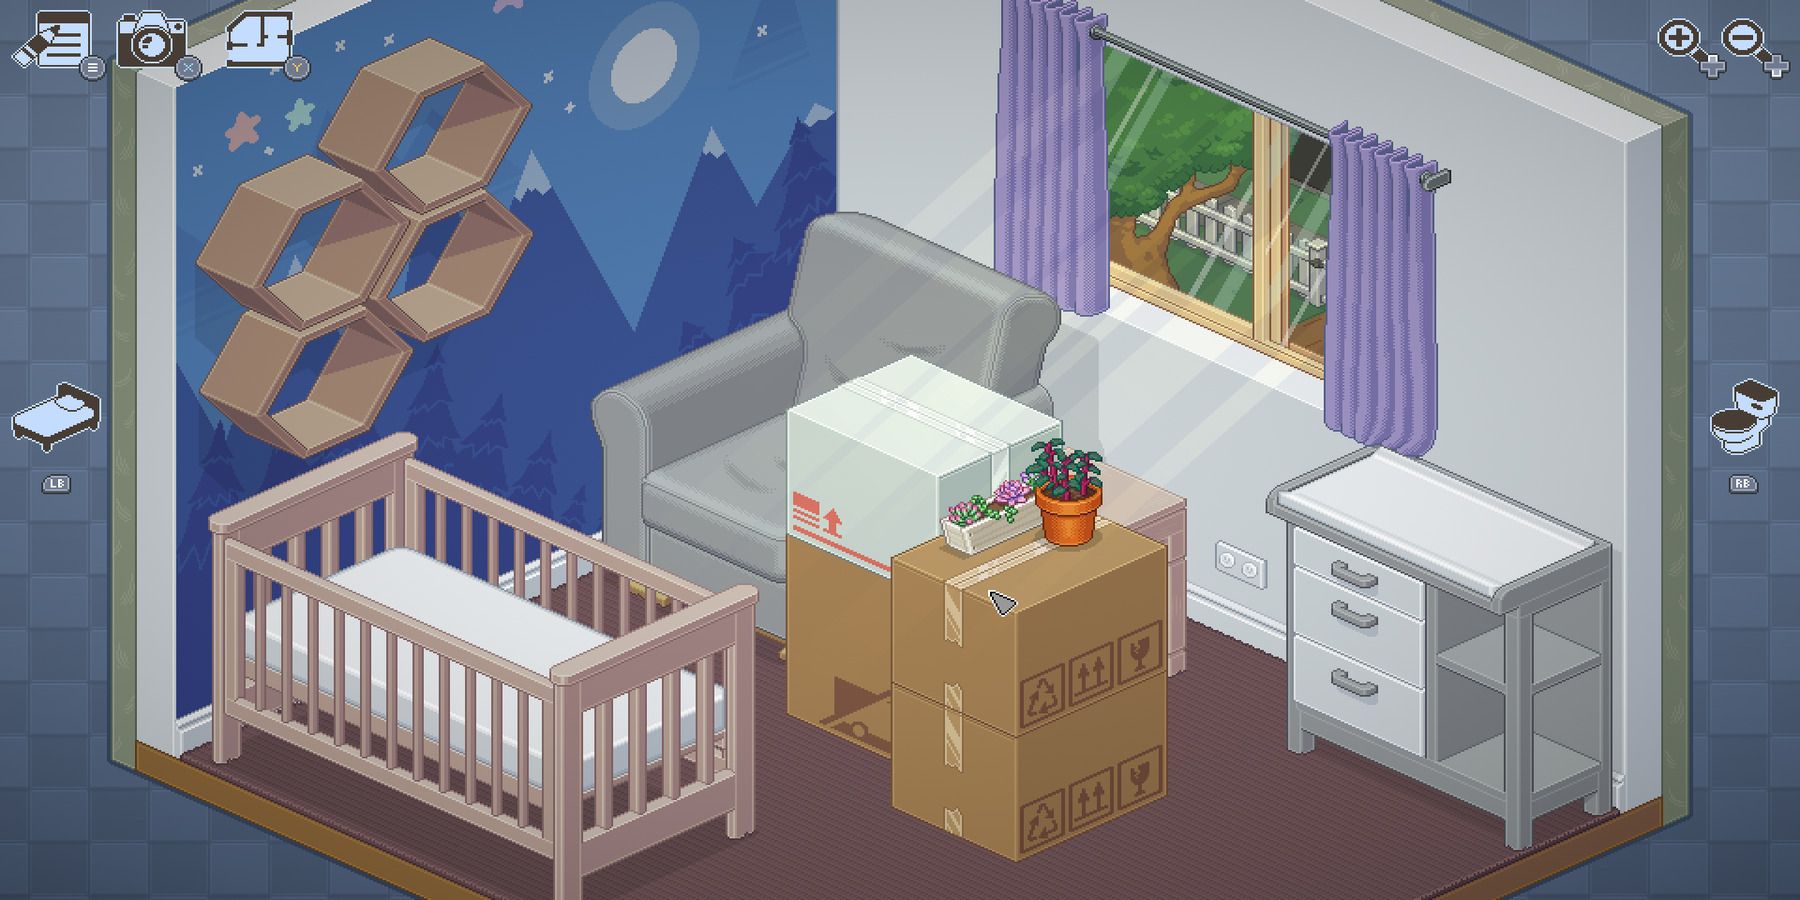 Kids room with boxes